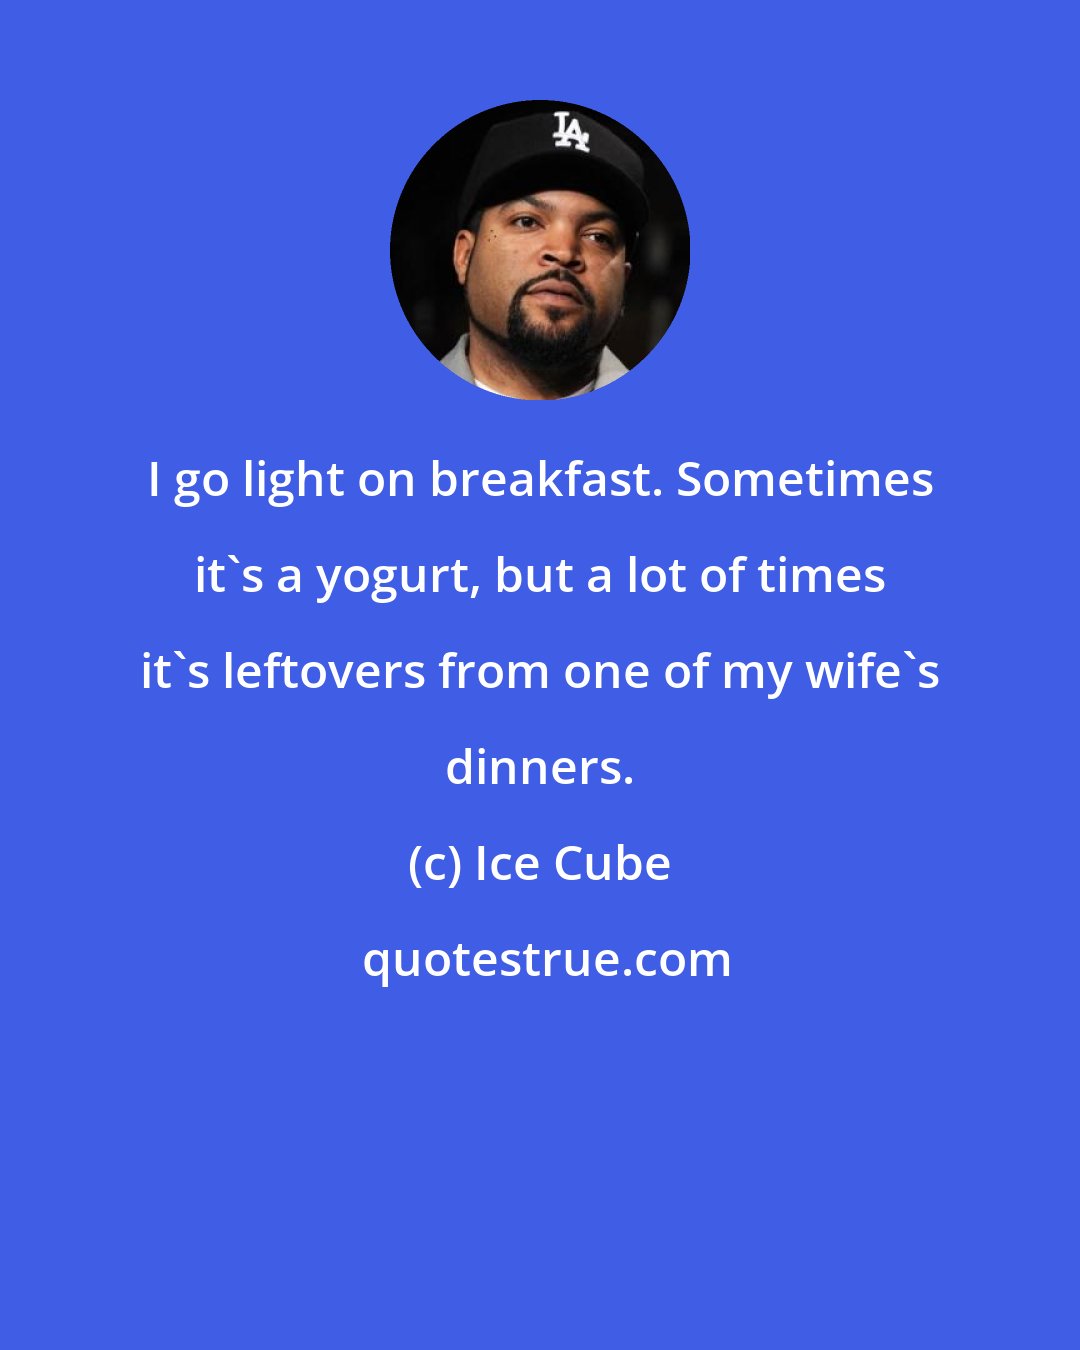 Ice Cube: I go light on breakfast. Sometimes it's a yogurt, but a lot of times it's leftovers from one of my wife's dinners.